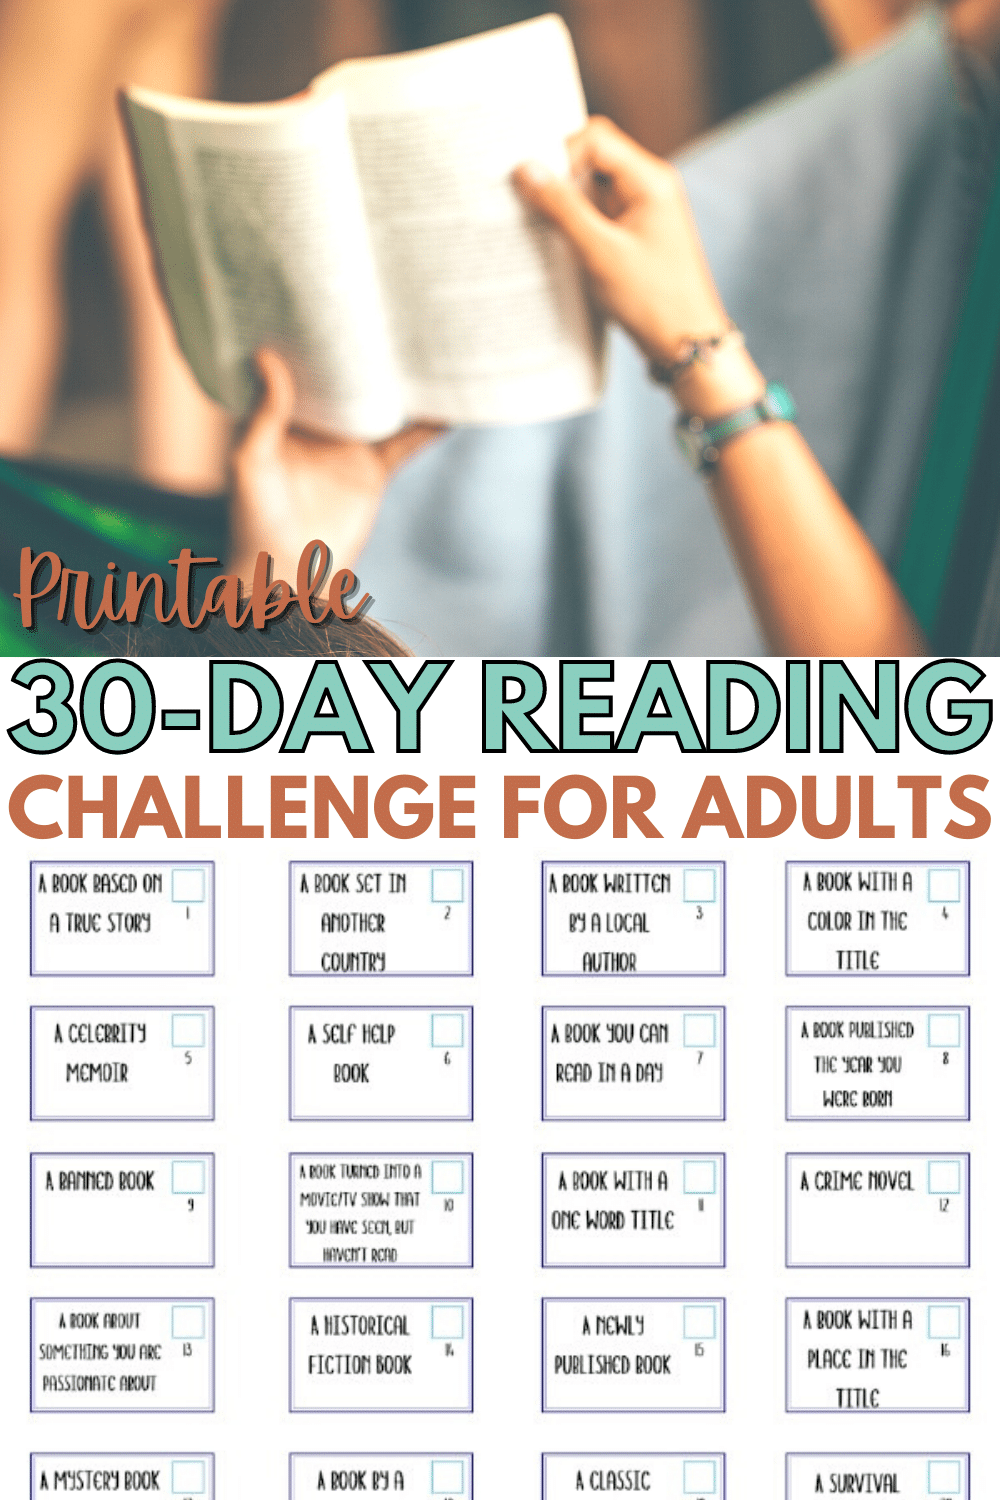 This printable 30 Day Reading Challenge will help you get out of your reading rut. Trying out new authors and genres will make reading fun again. #reading #30daychallenge #printables via @wondermomwannab